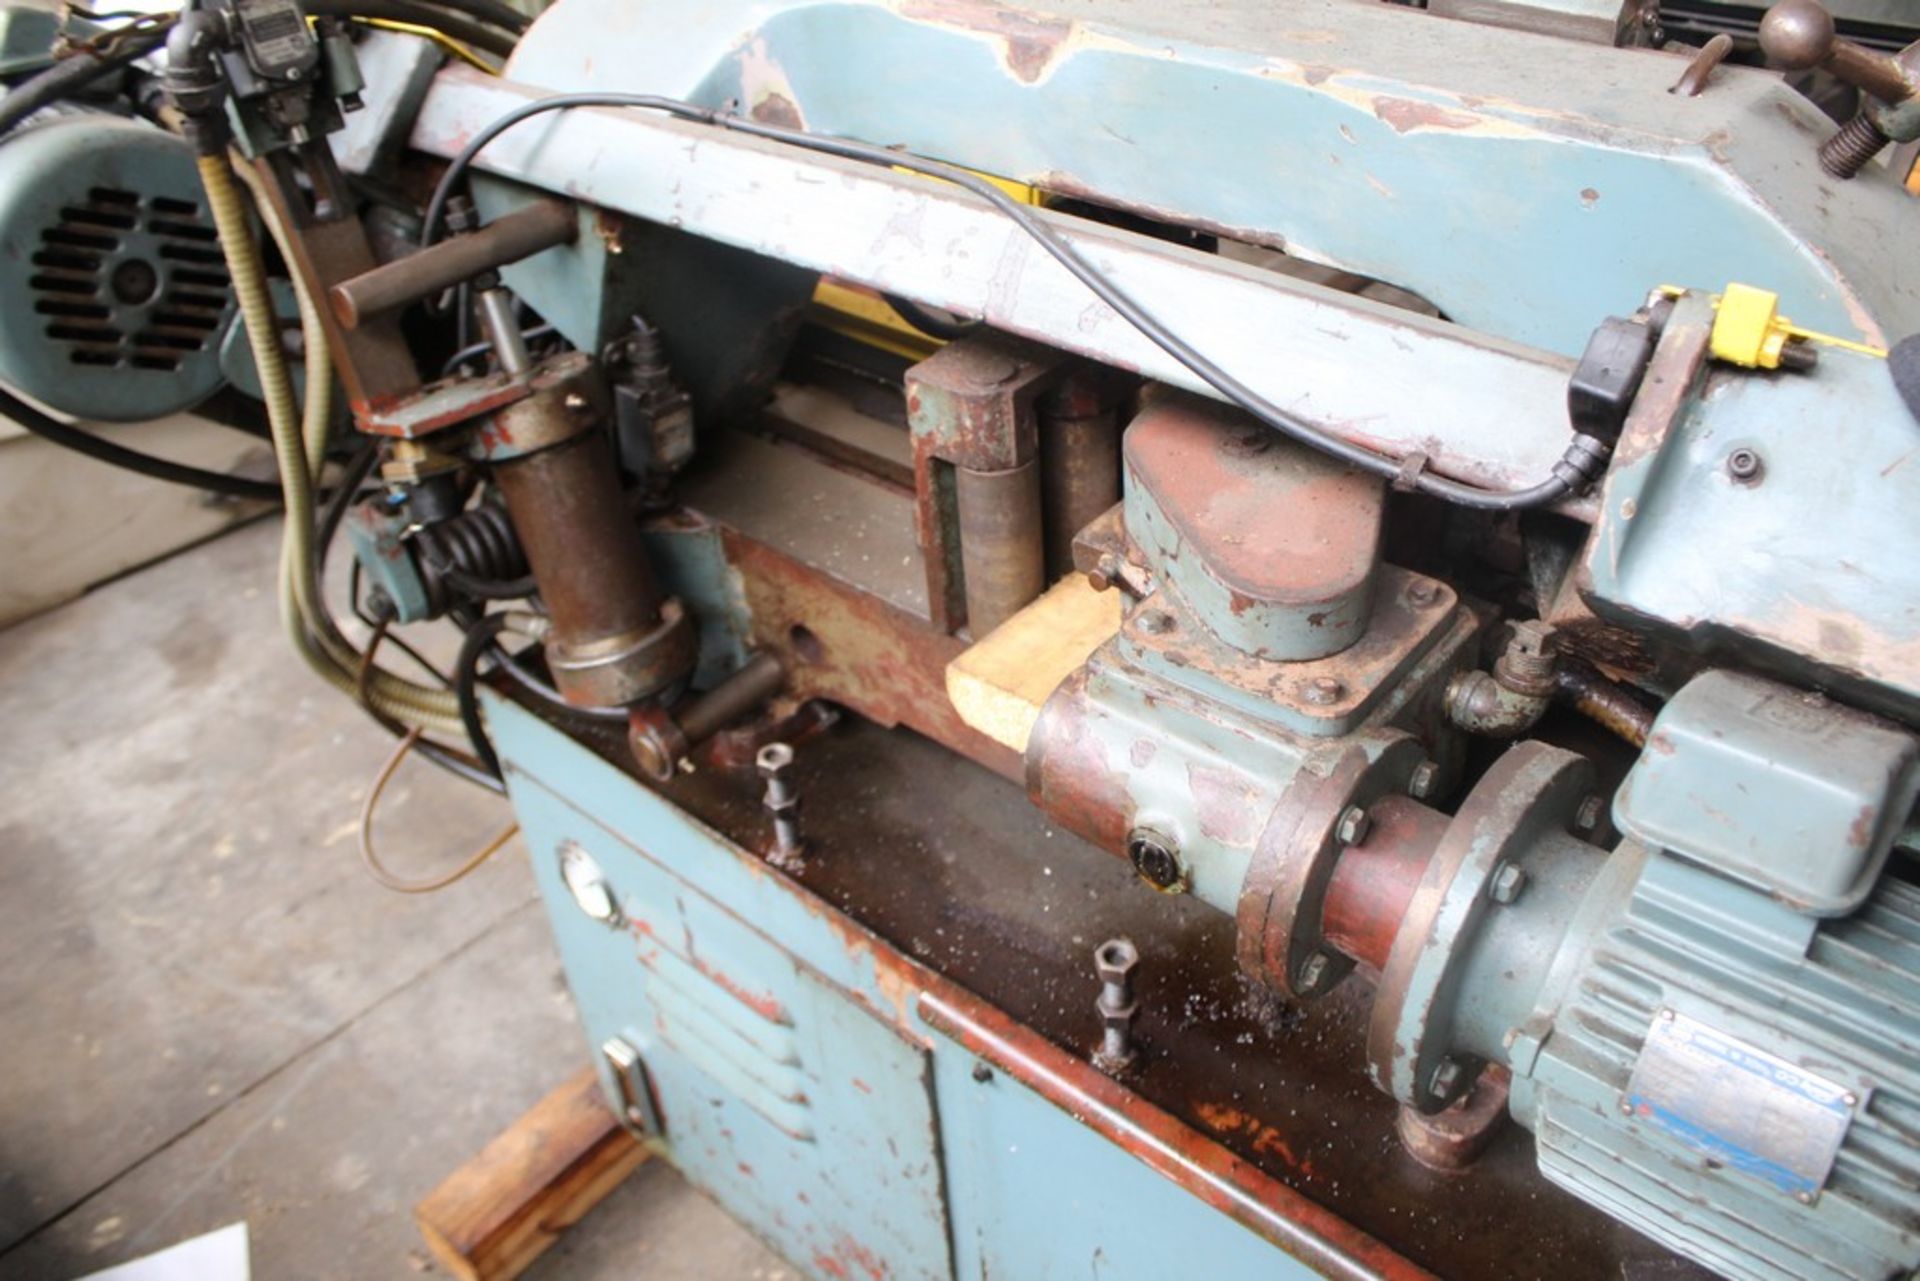 10" X 10" COSEN AUTOMATIC HORIZONTAL BAND SAW, S/N C190821 (1981) MODEL AH250, EQUIPPED WITH VISE, - Image 3 of 4